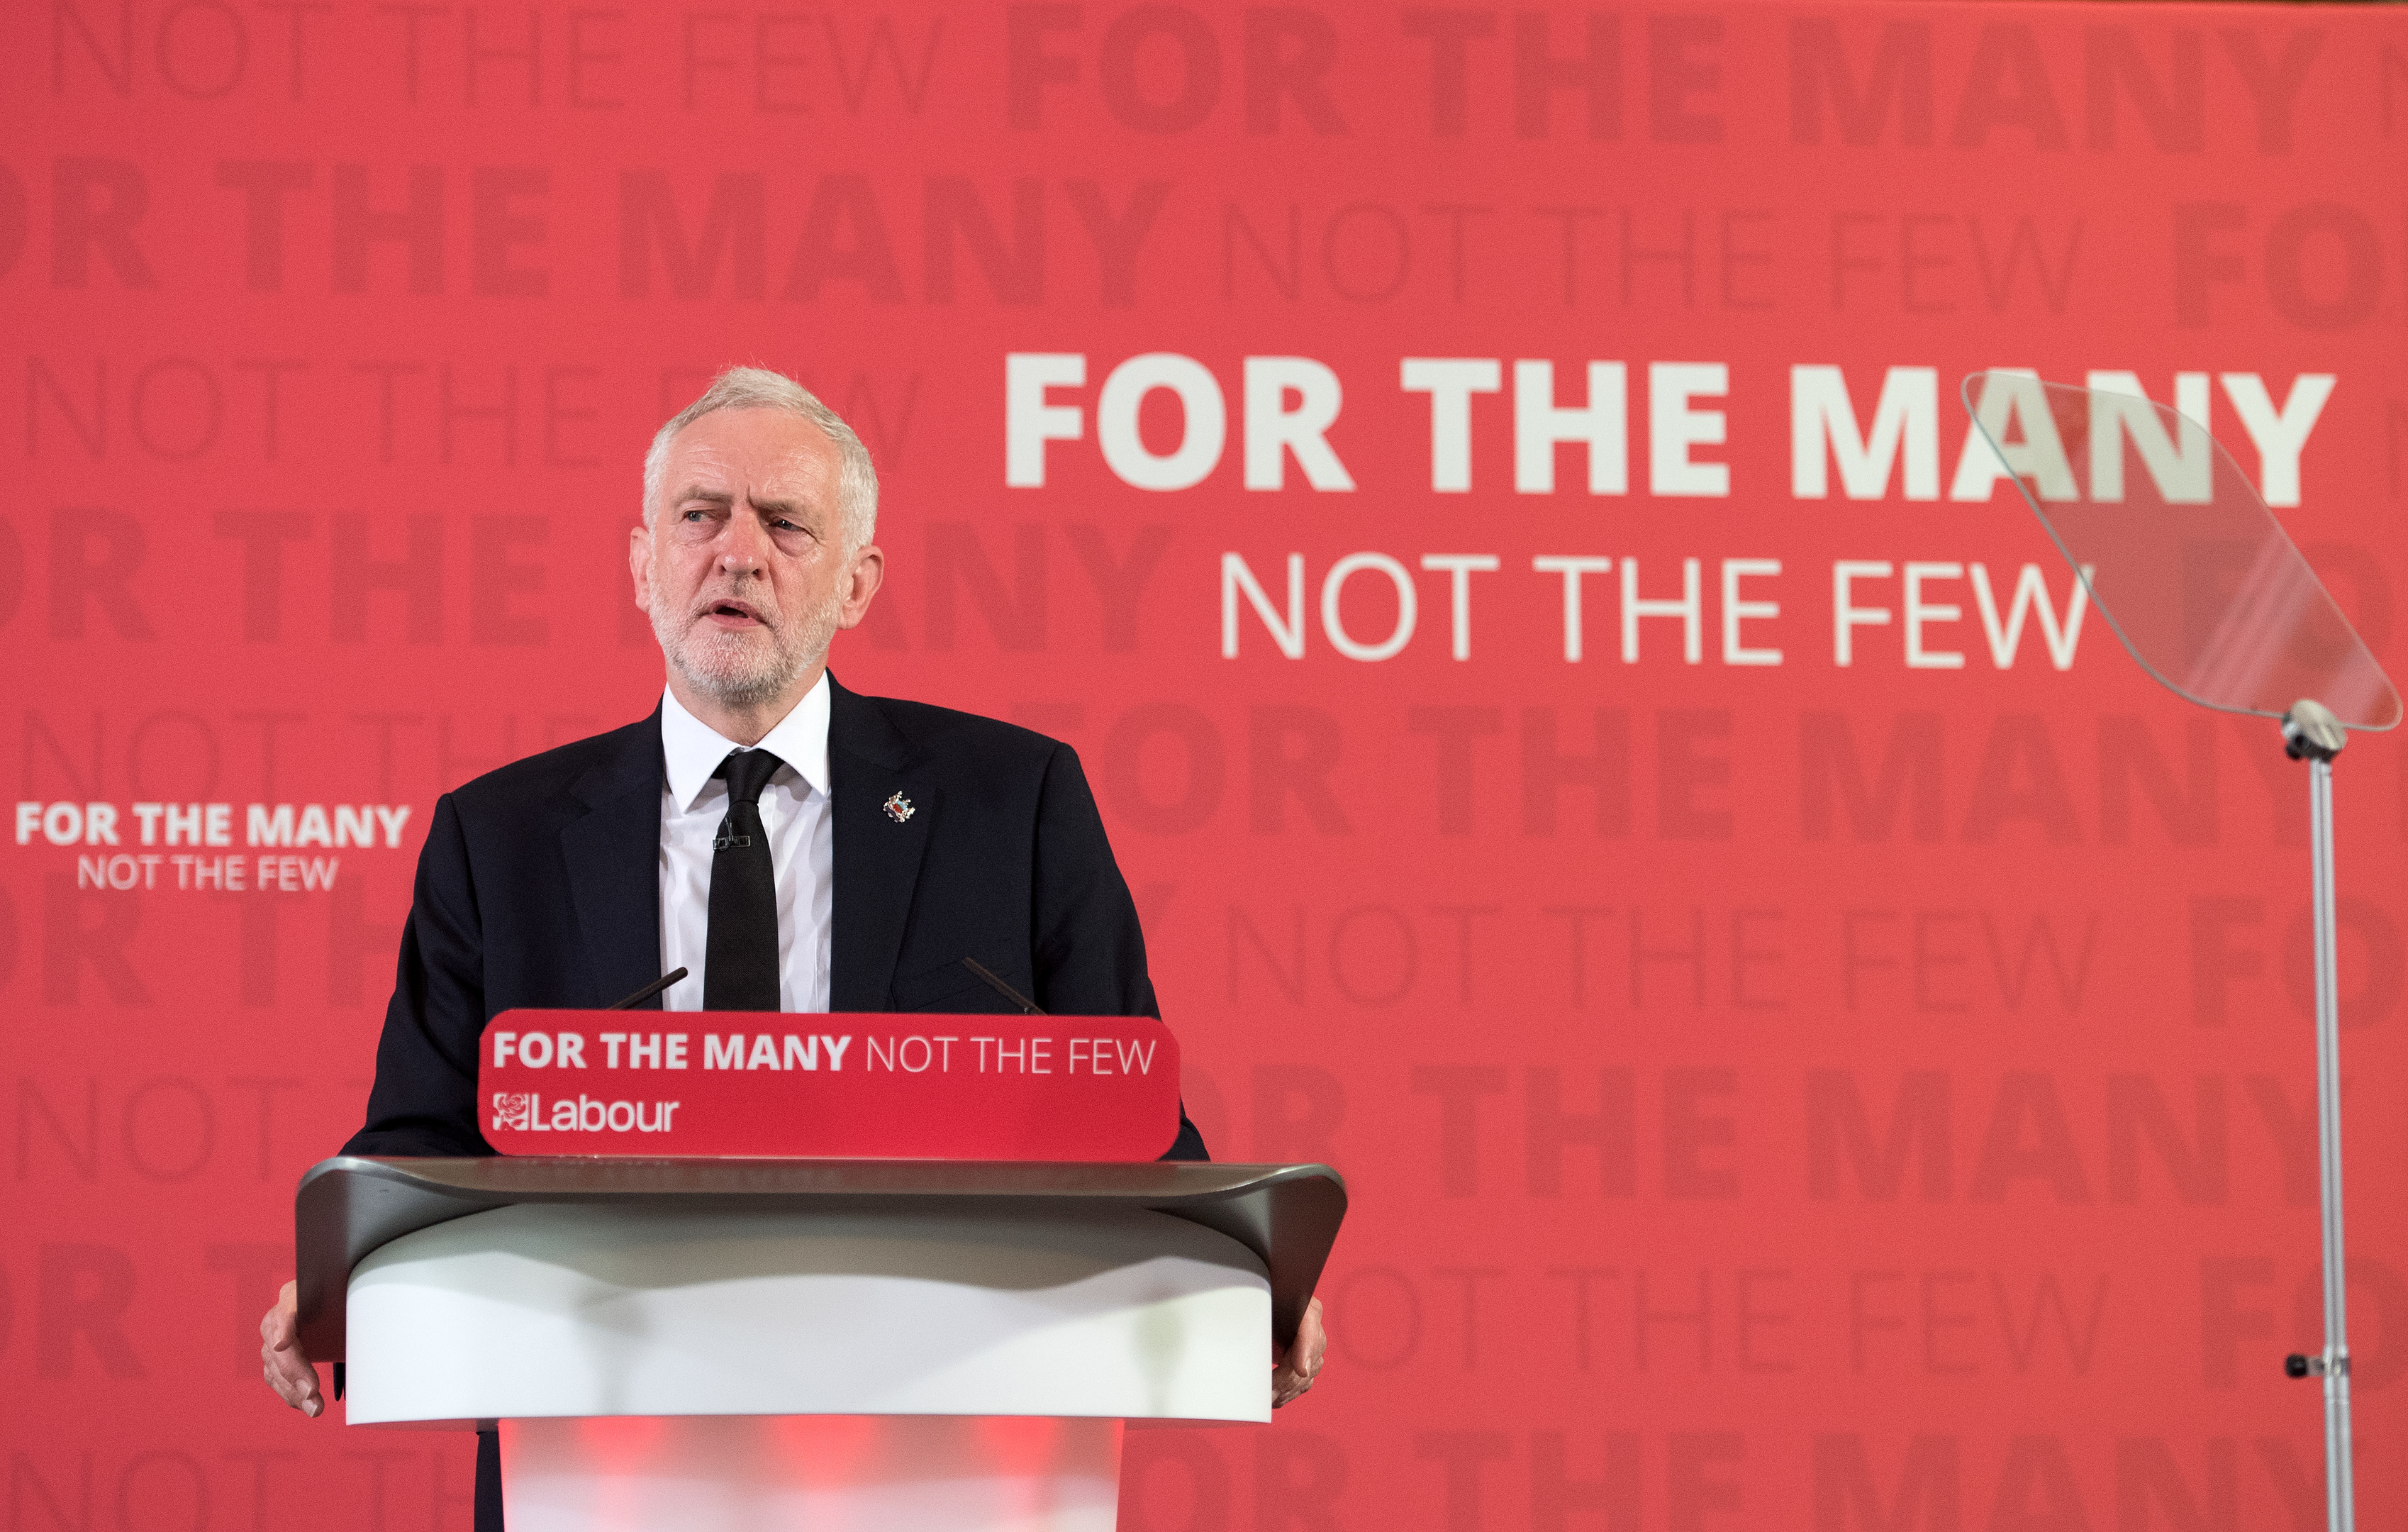 Mr Corbyn stated that UK foreign policy would change under a Labour government to one that "reduces rather than increases the threat" to the country, as election campaigning resumed after the attack in Manchester earlier this week. (Carl Court/Getty Images)